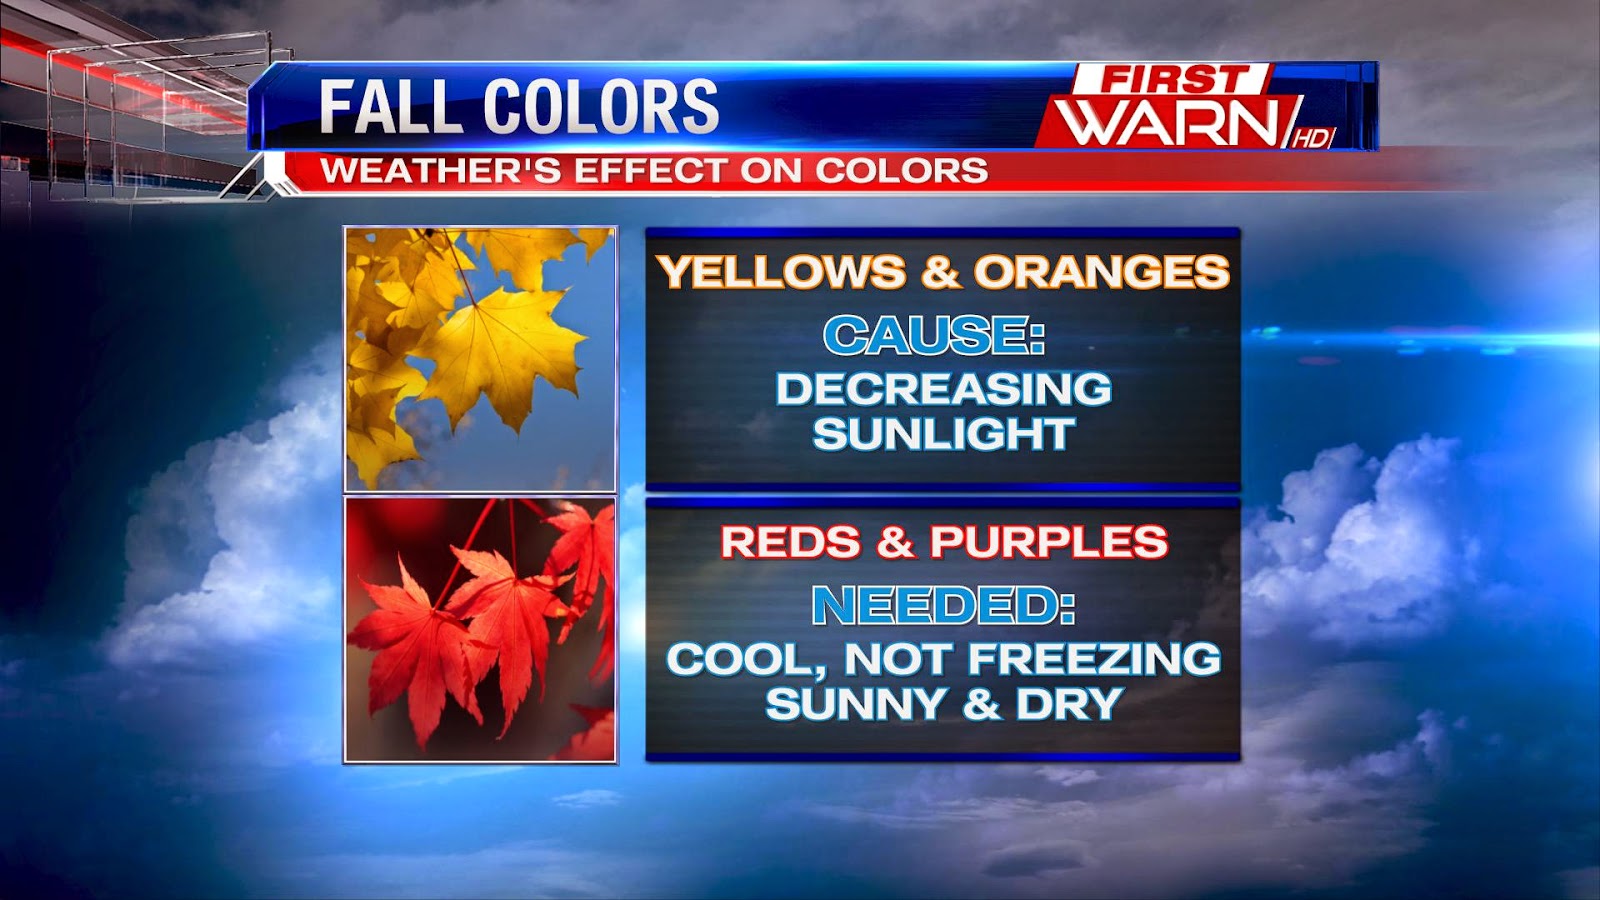 First Warn Weather Team: Weather's Effect On Fall Colors